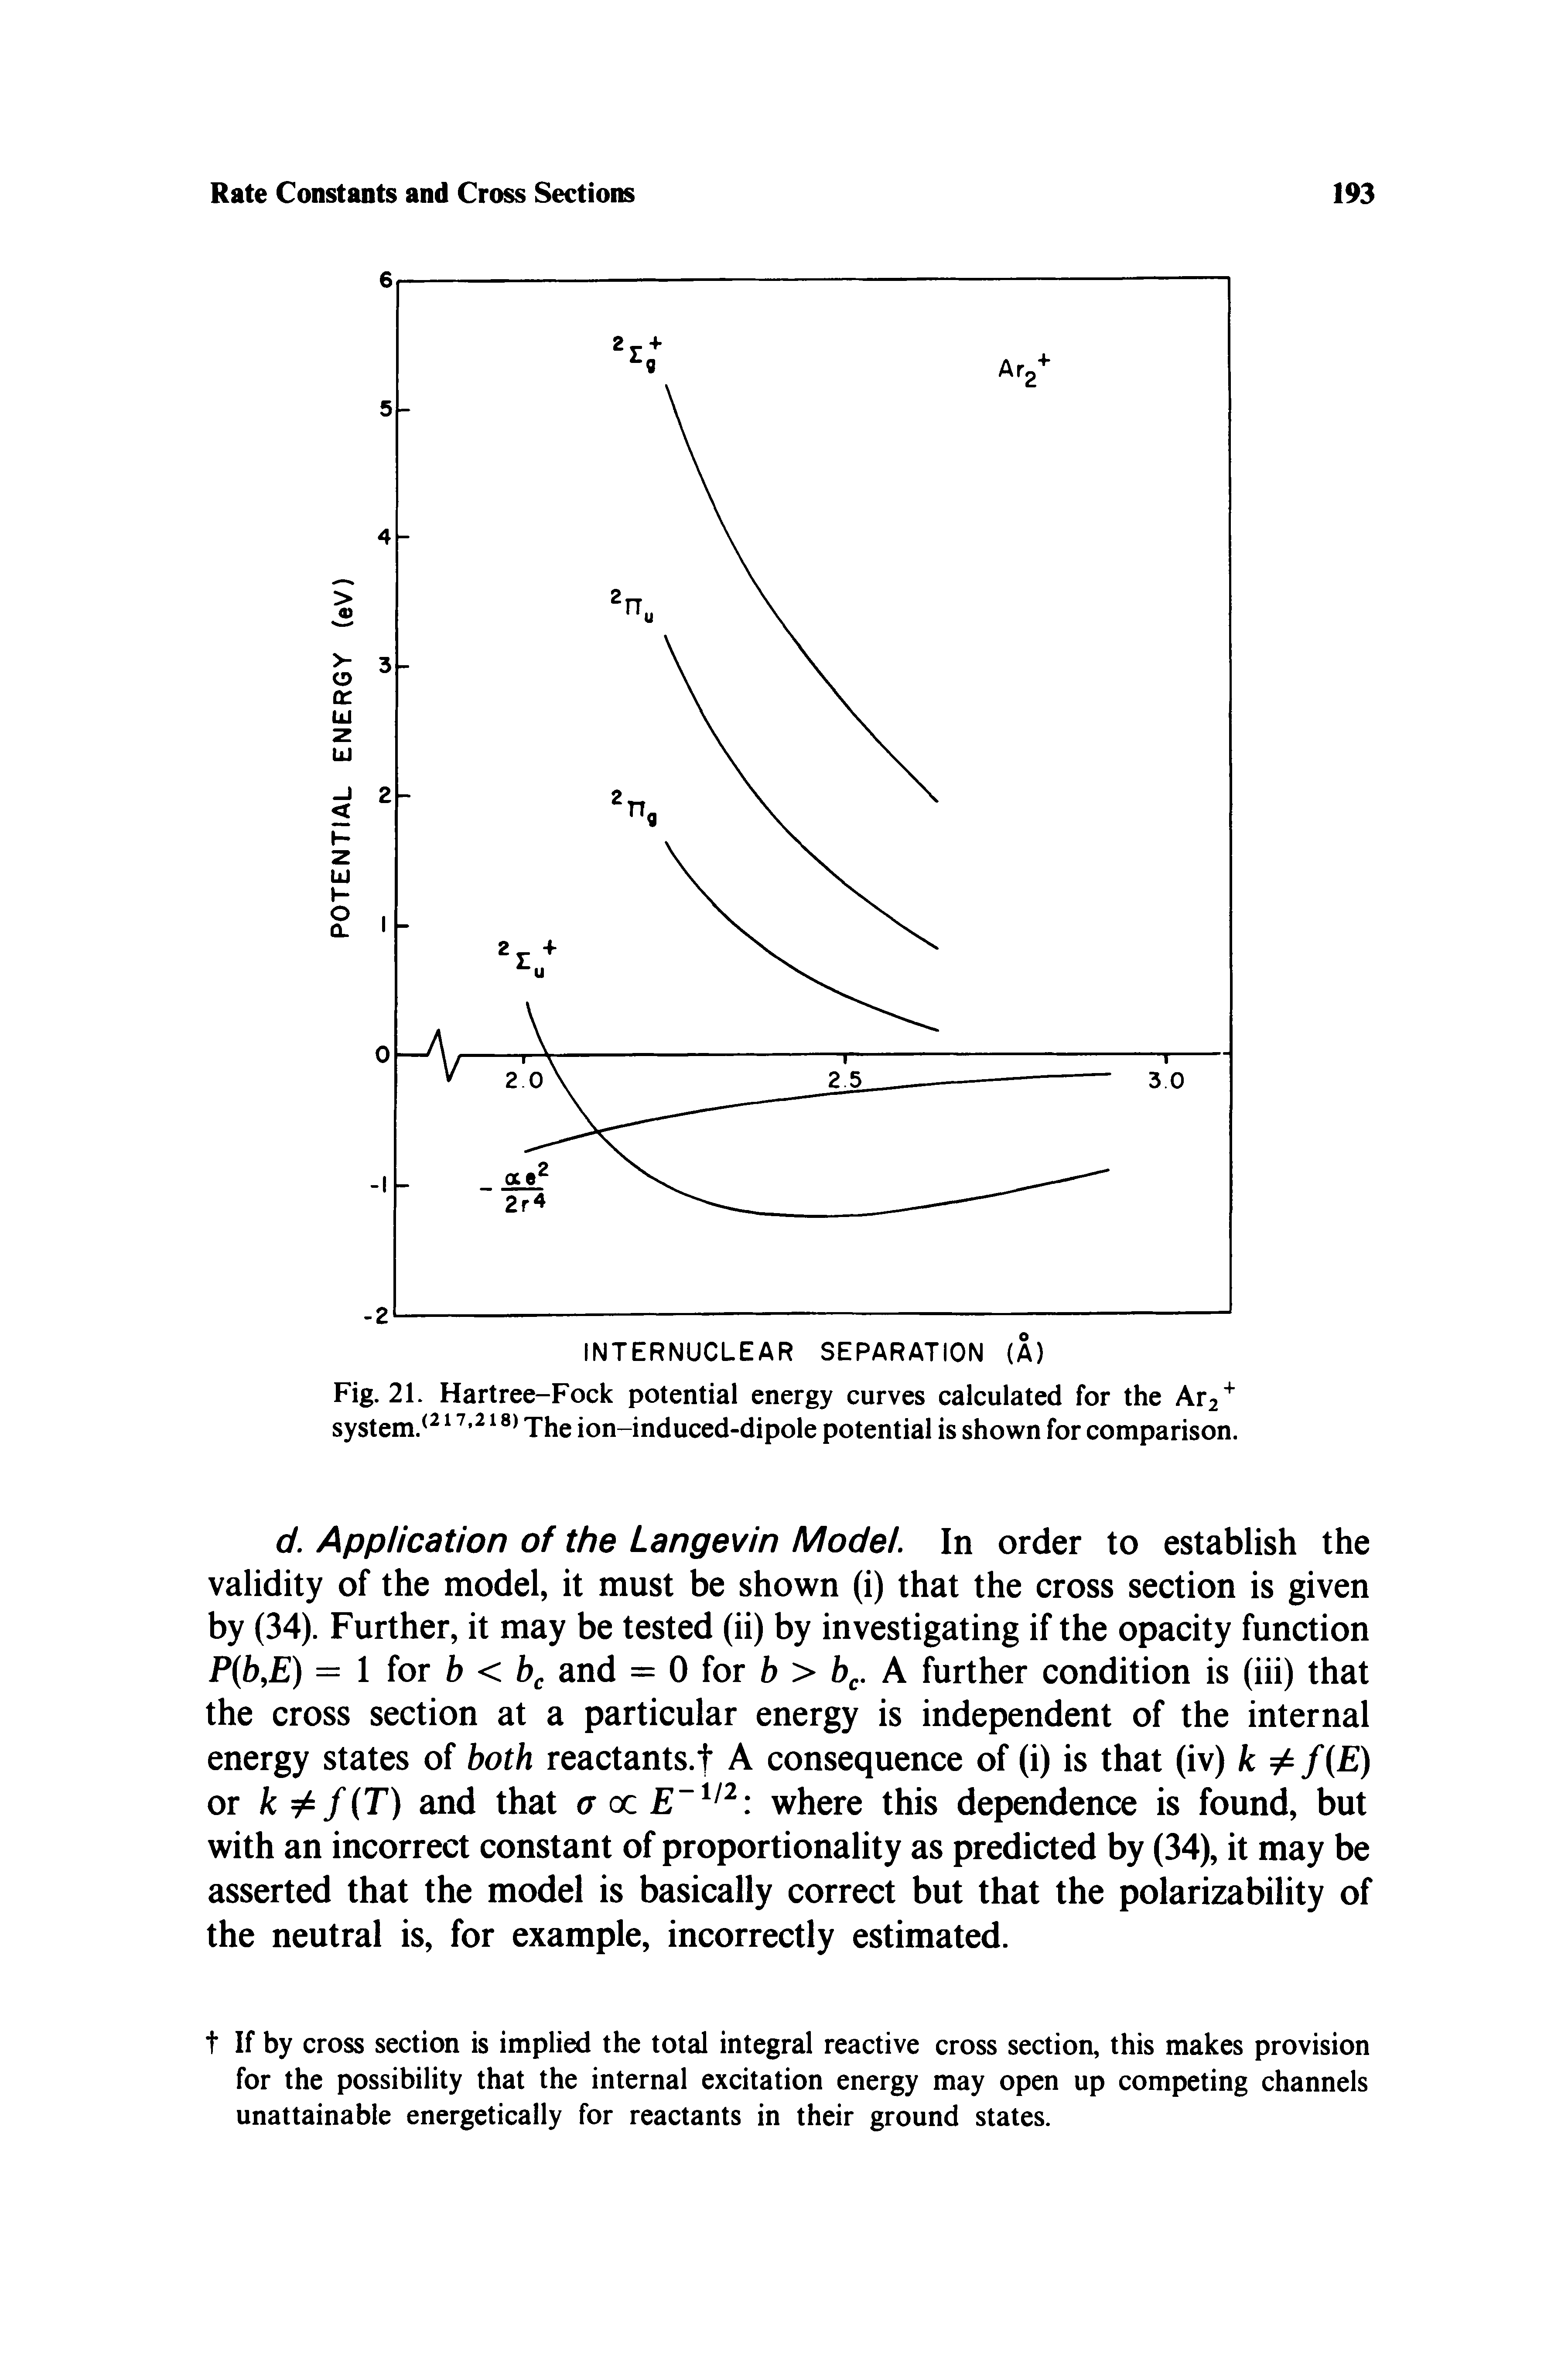 Fig. 21. Hartree-Fock potential energy curves calculated for the Ar2 system. The ion-induced-dipole potential is shown for comparison.